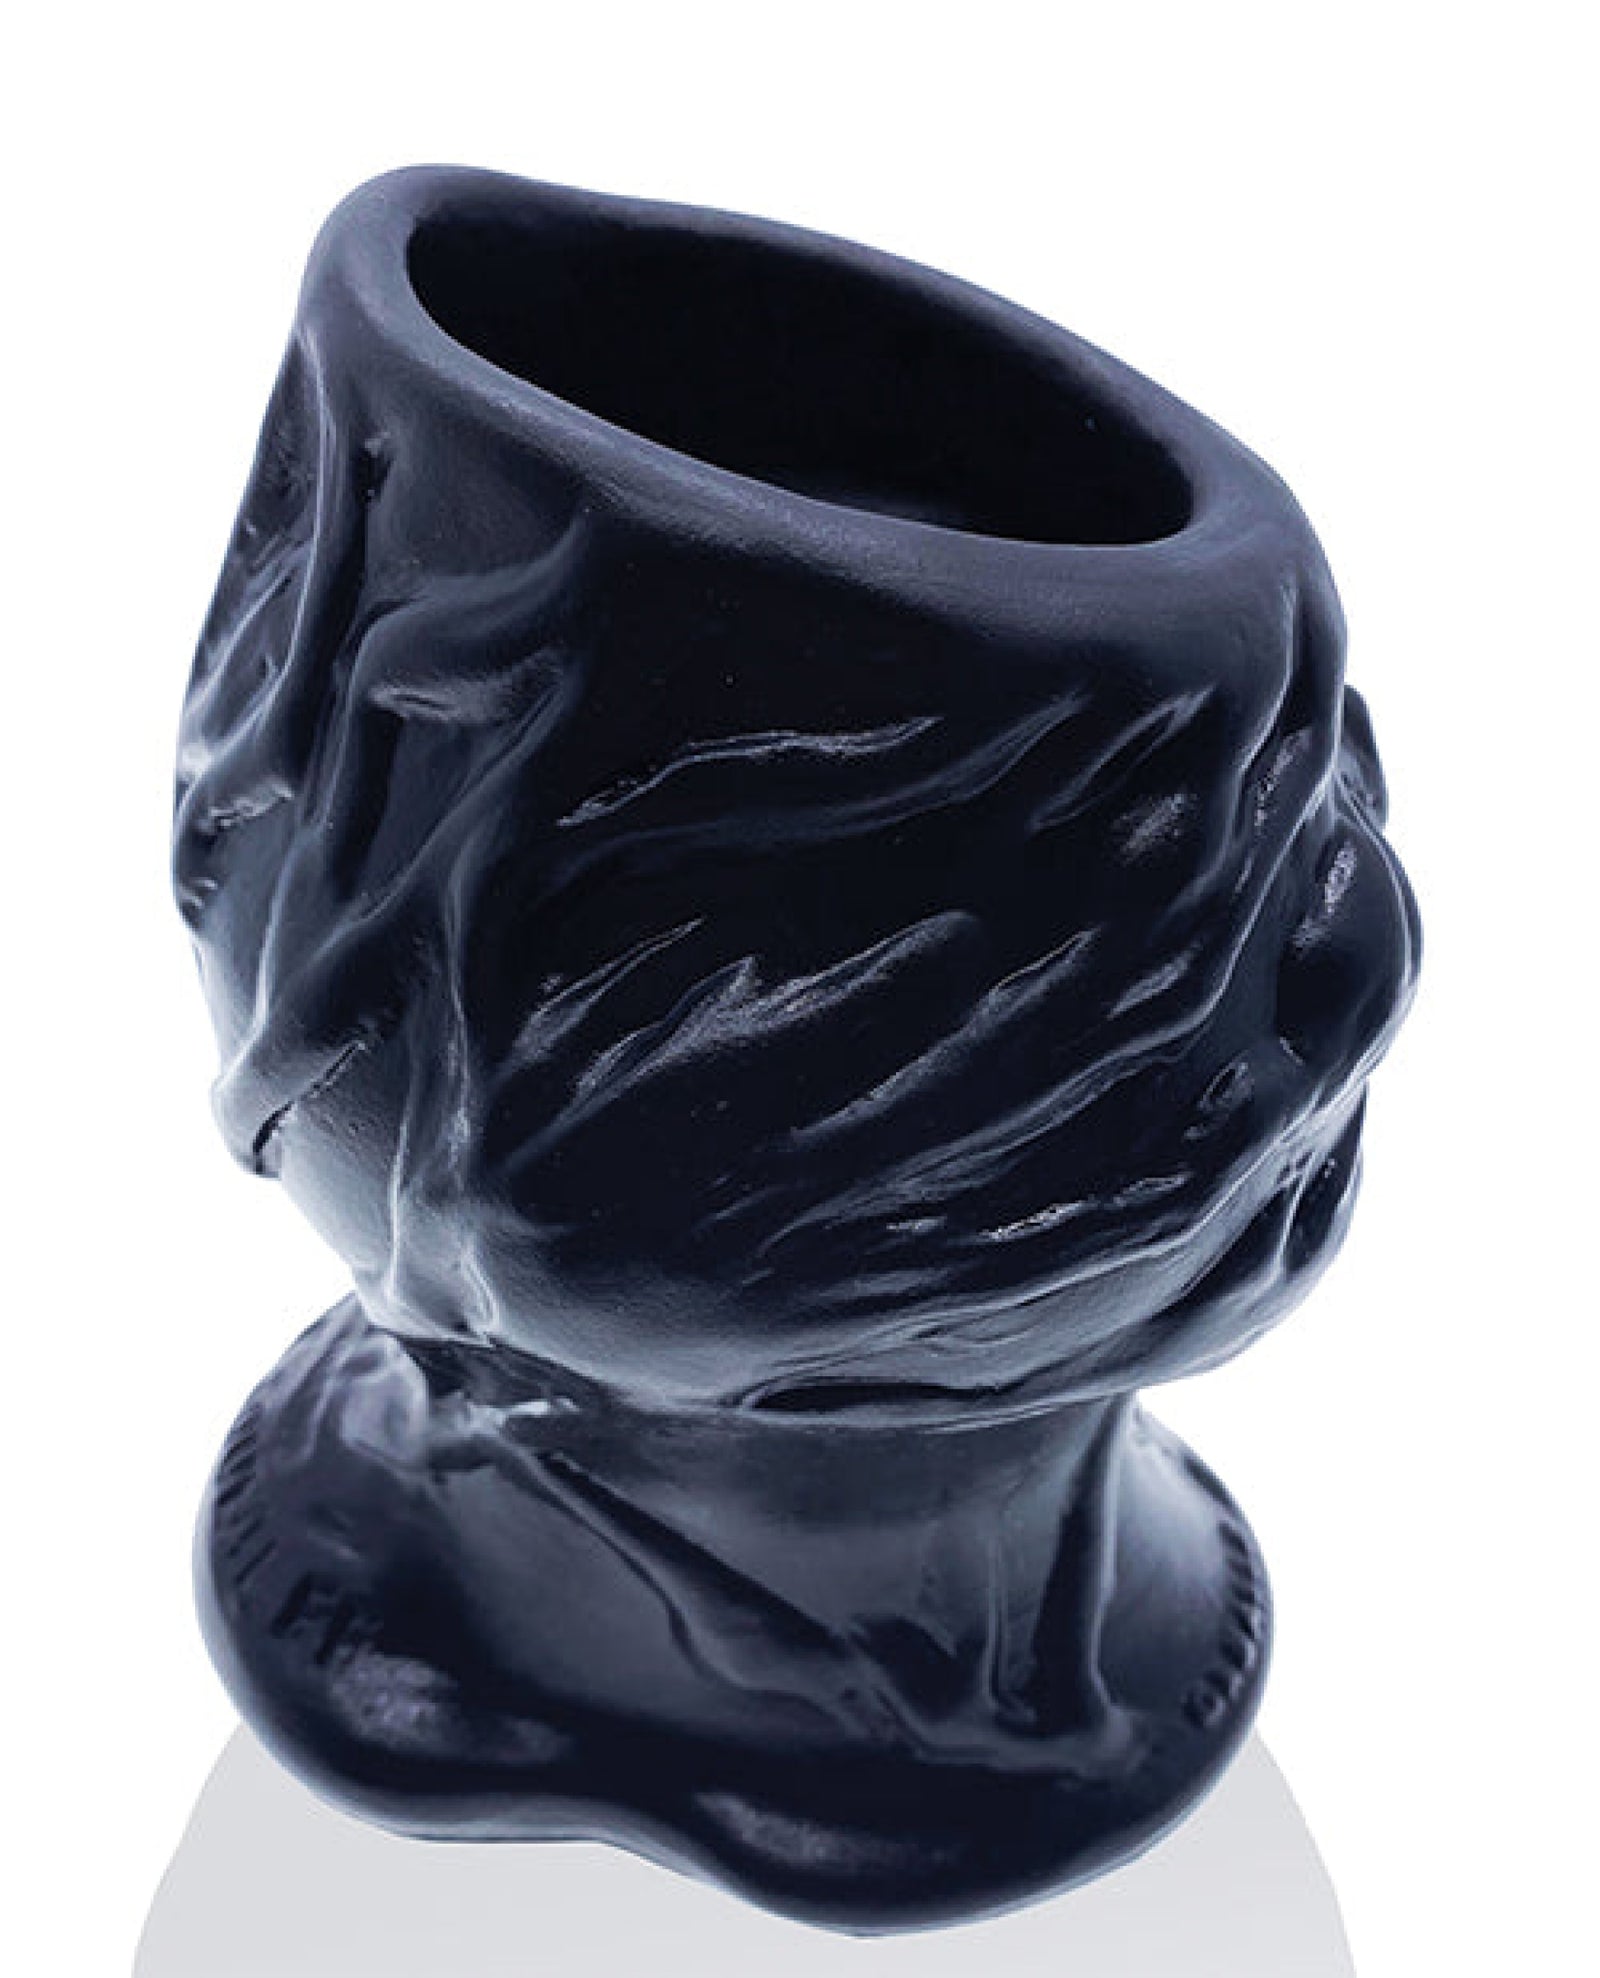 Oxballs Pighole Squeal Ff Hollow Plug - Black Hunky Junk